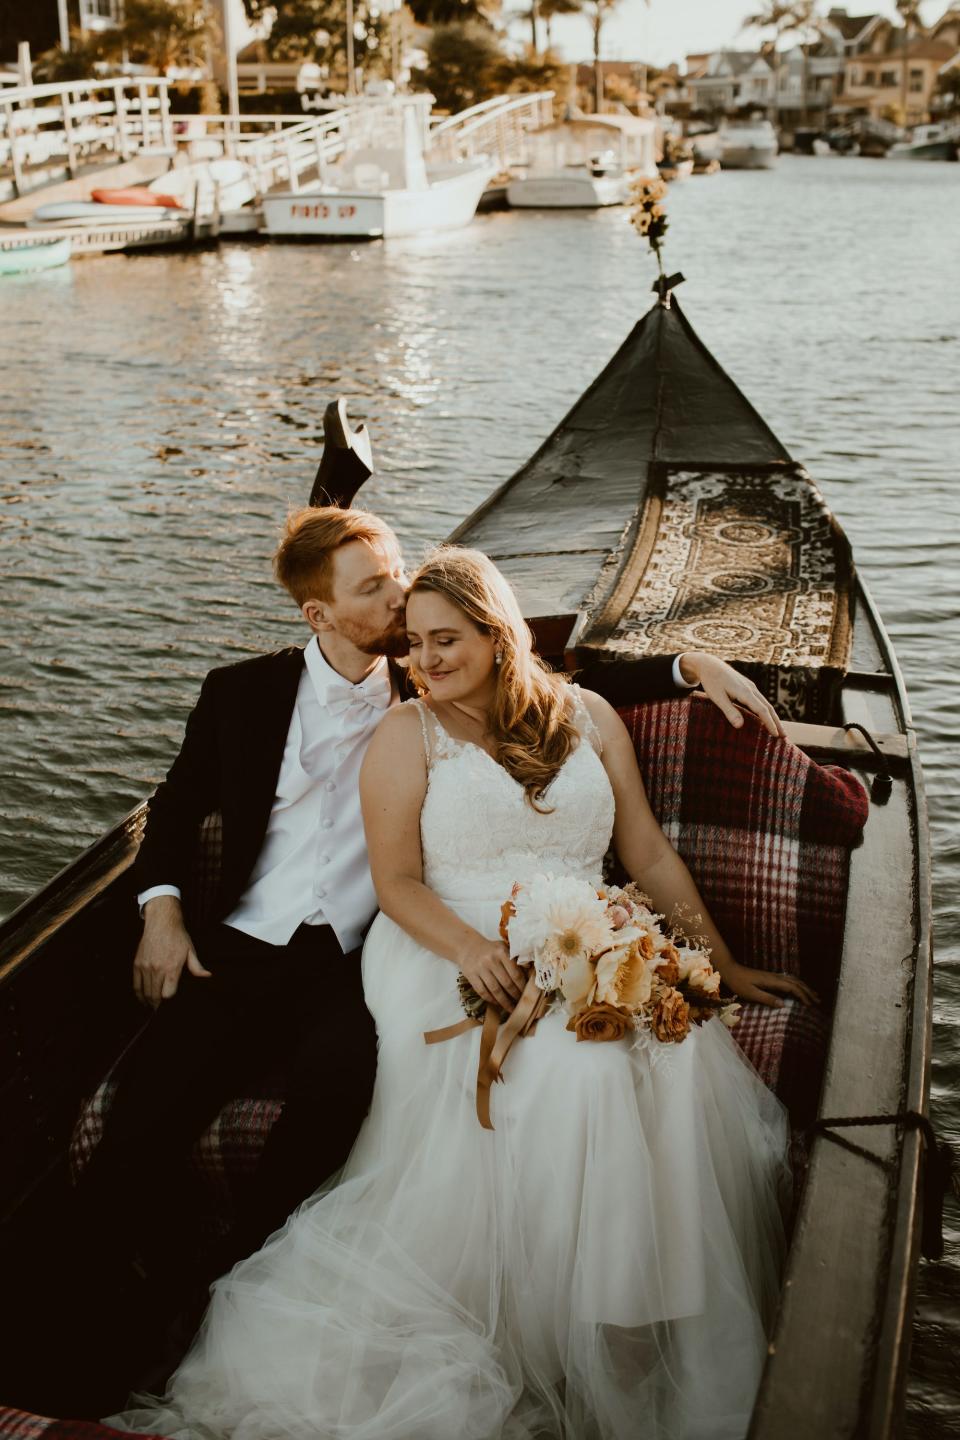 A groom kisses his bride's head as they sit in their wedding attire on a gondola.